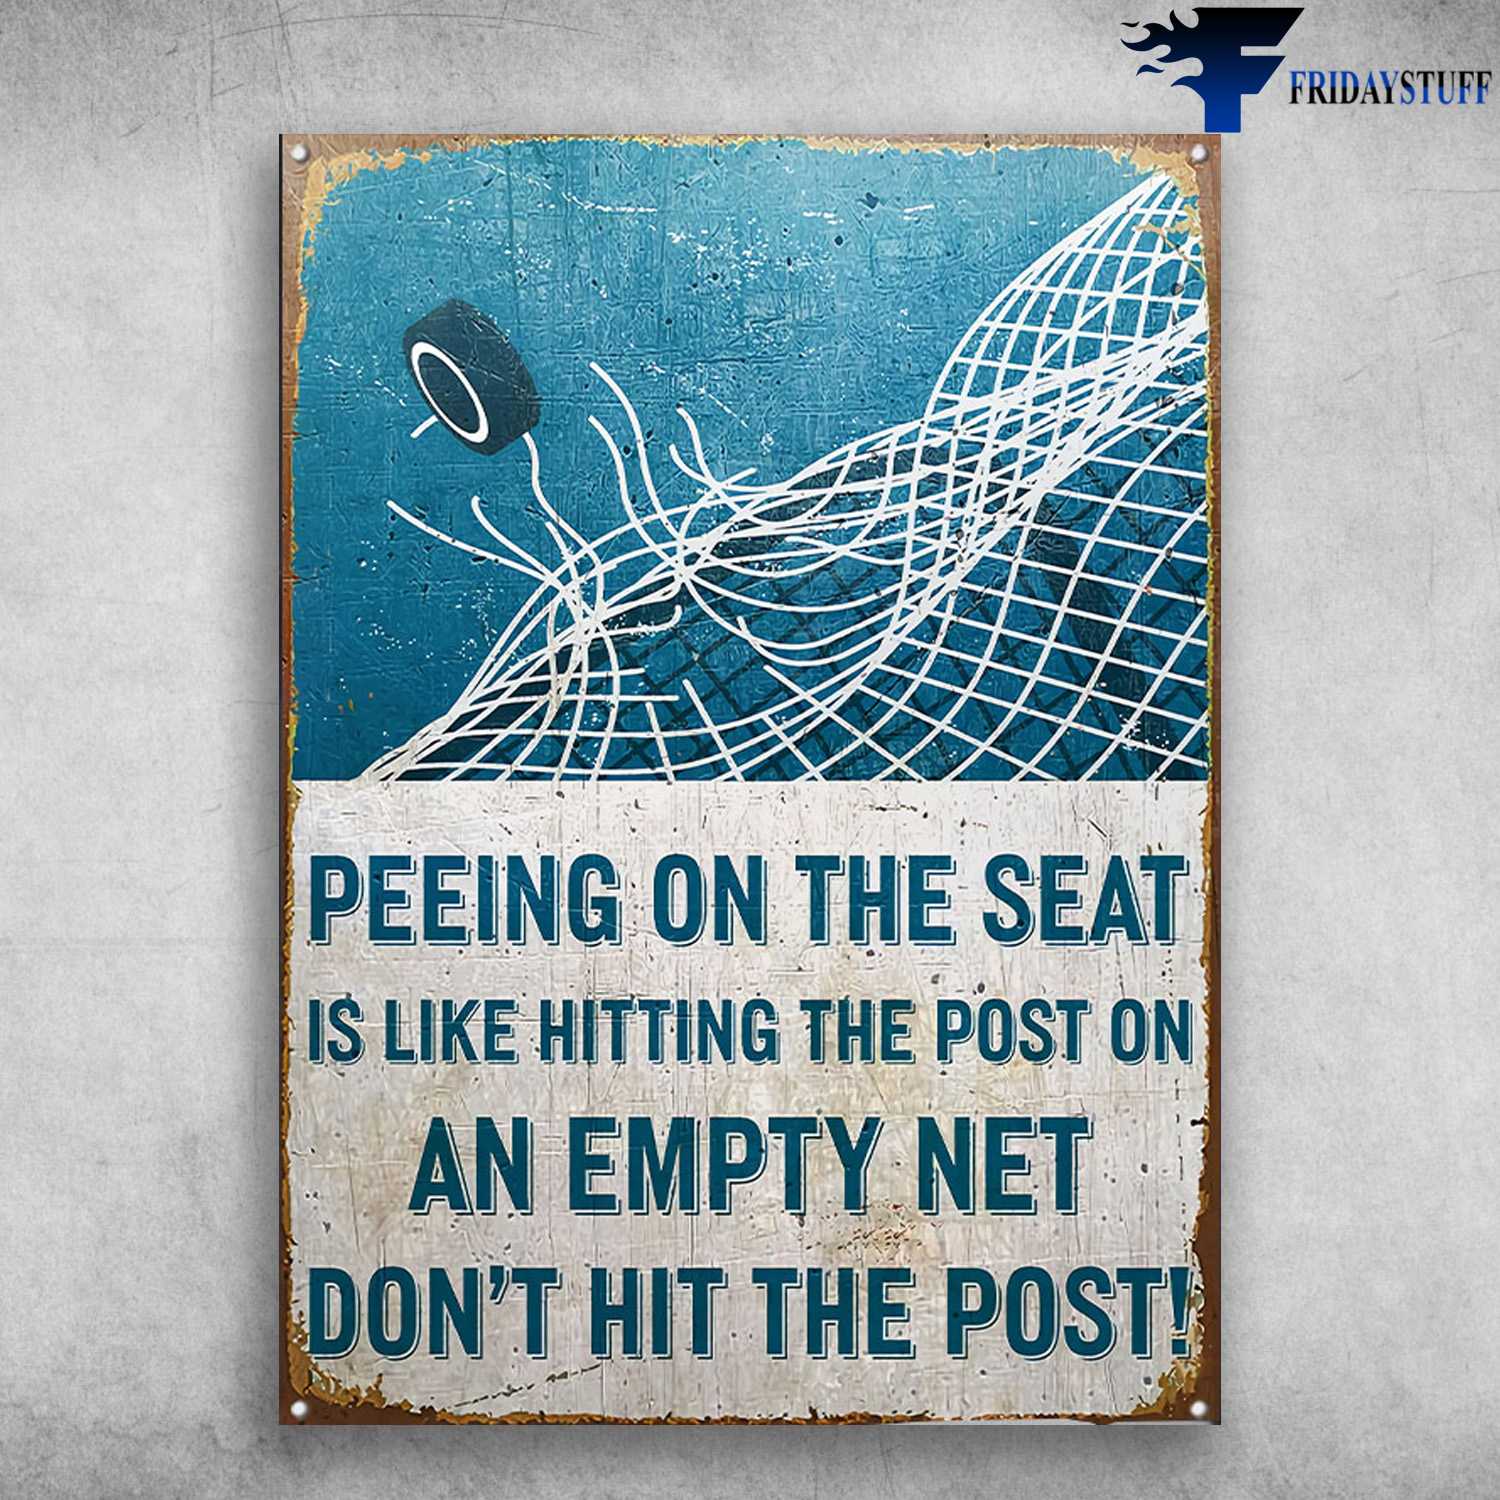 Hockey Goal, Hockey Poster - Peeing On The Seat, Is Like Hitting The Post On An Empty Net, Don't Hit The Post, Hockey Lover